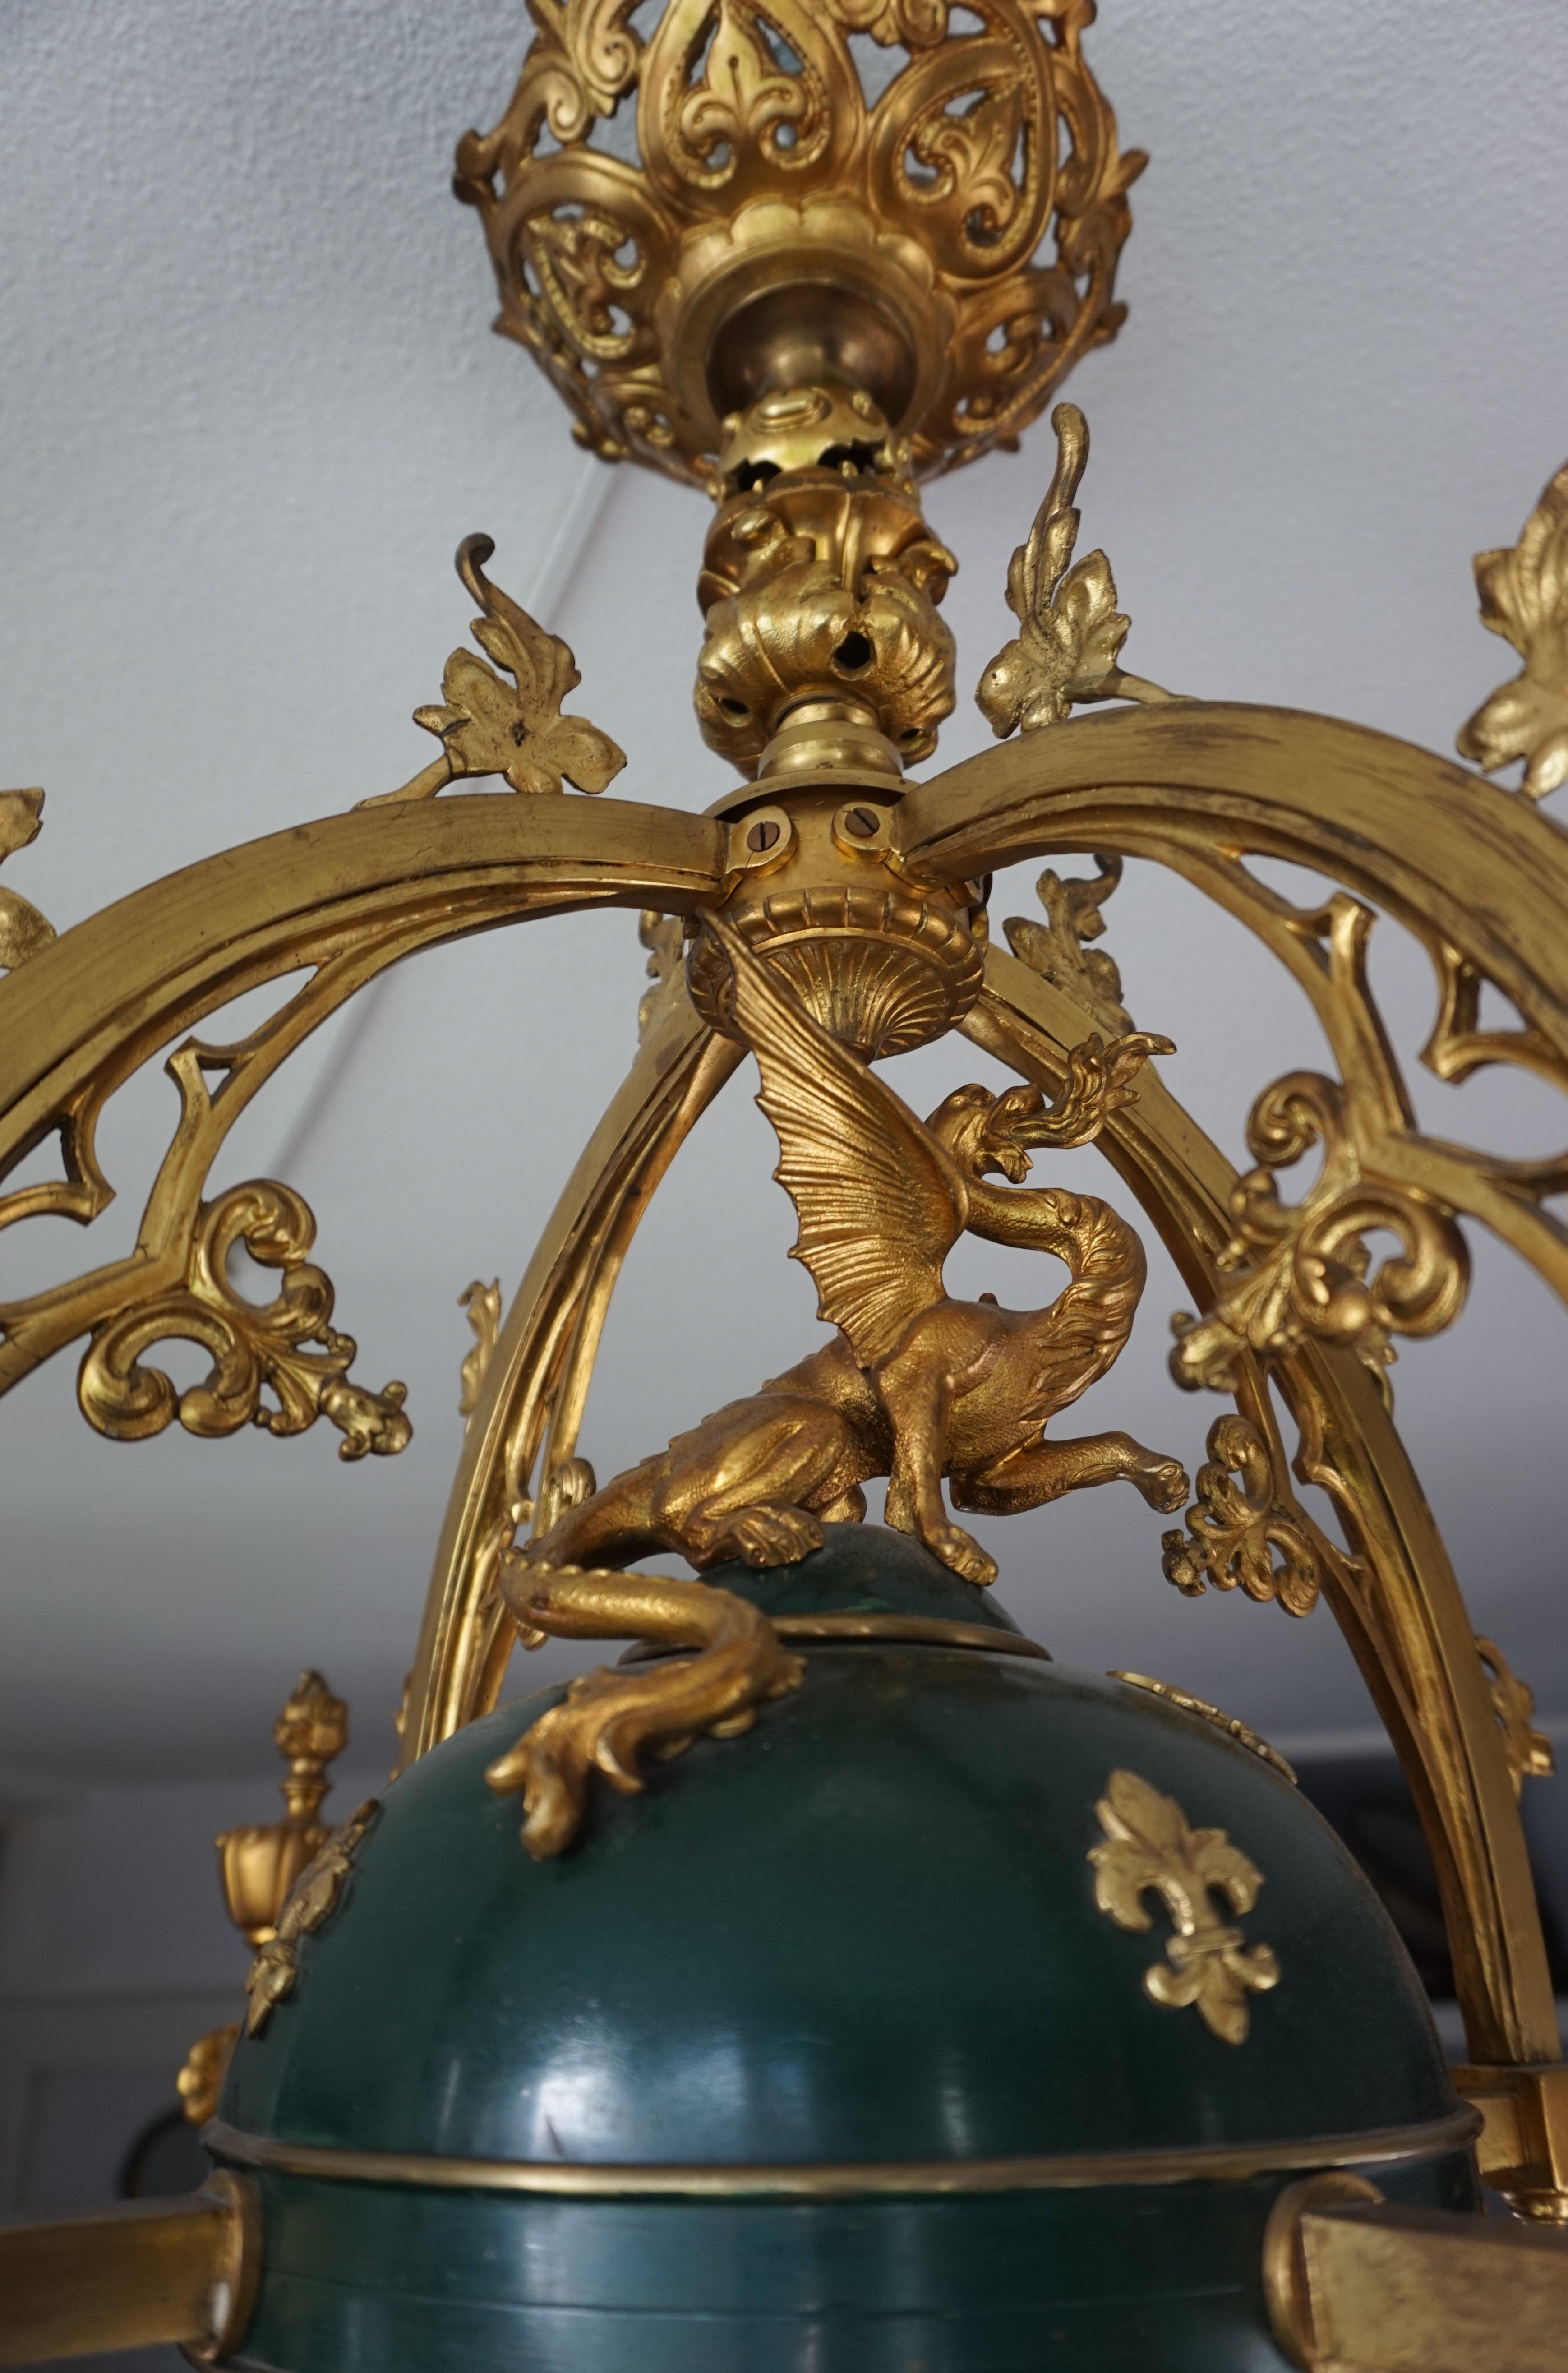 Stunning Gilt Bronze Gothic Revival Chandelier w. Dragon Sculpture & Glass Shade For Sale 1